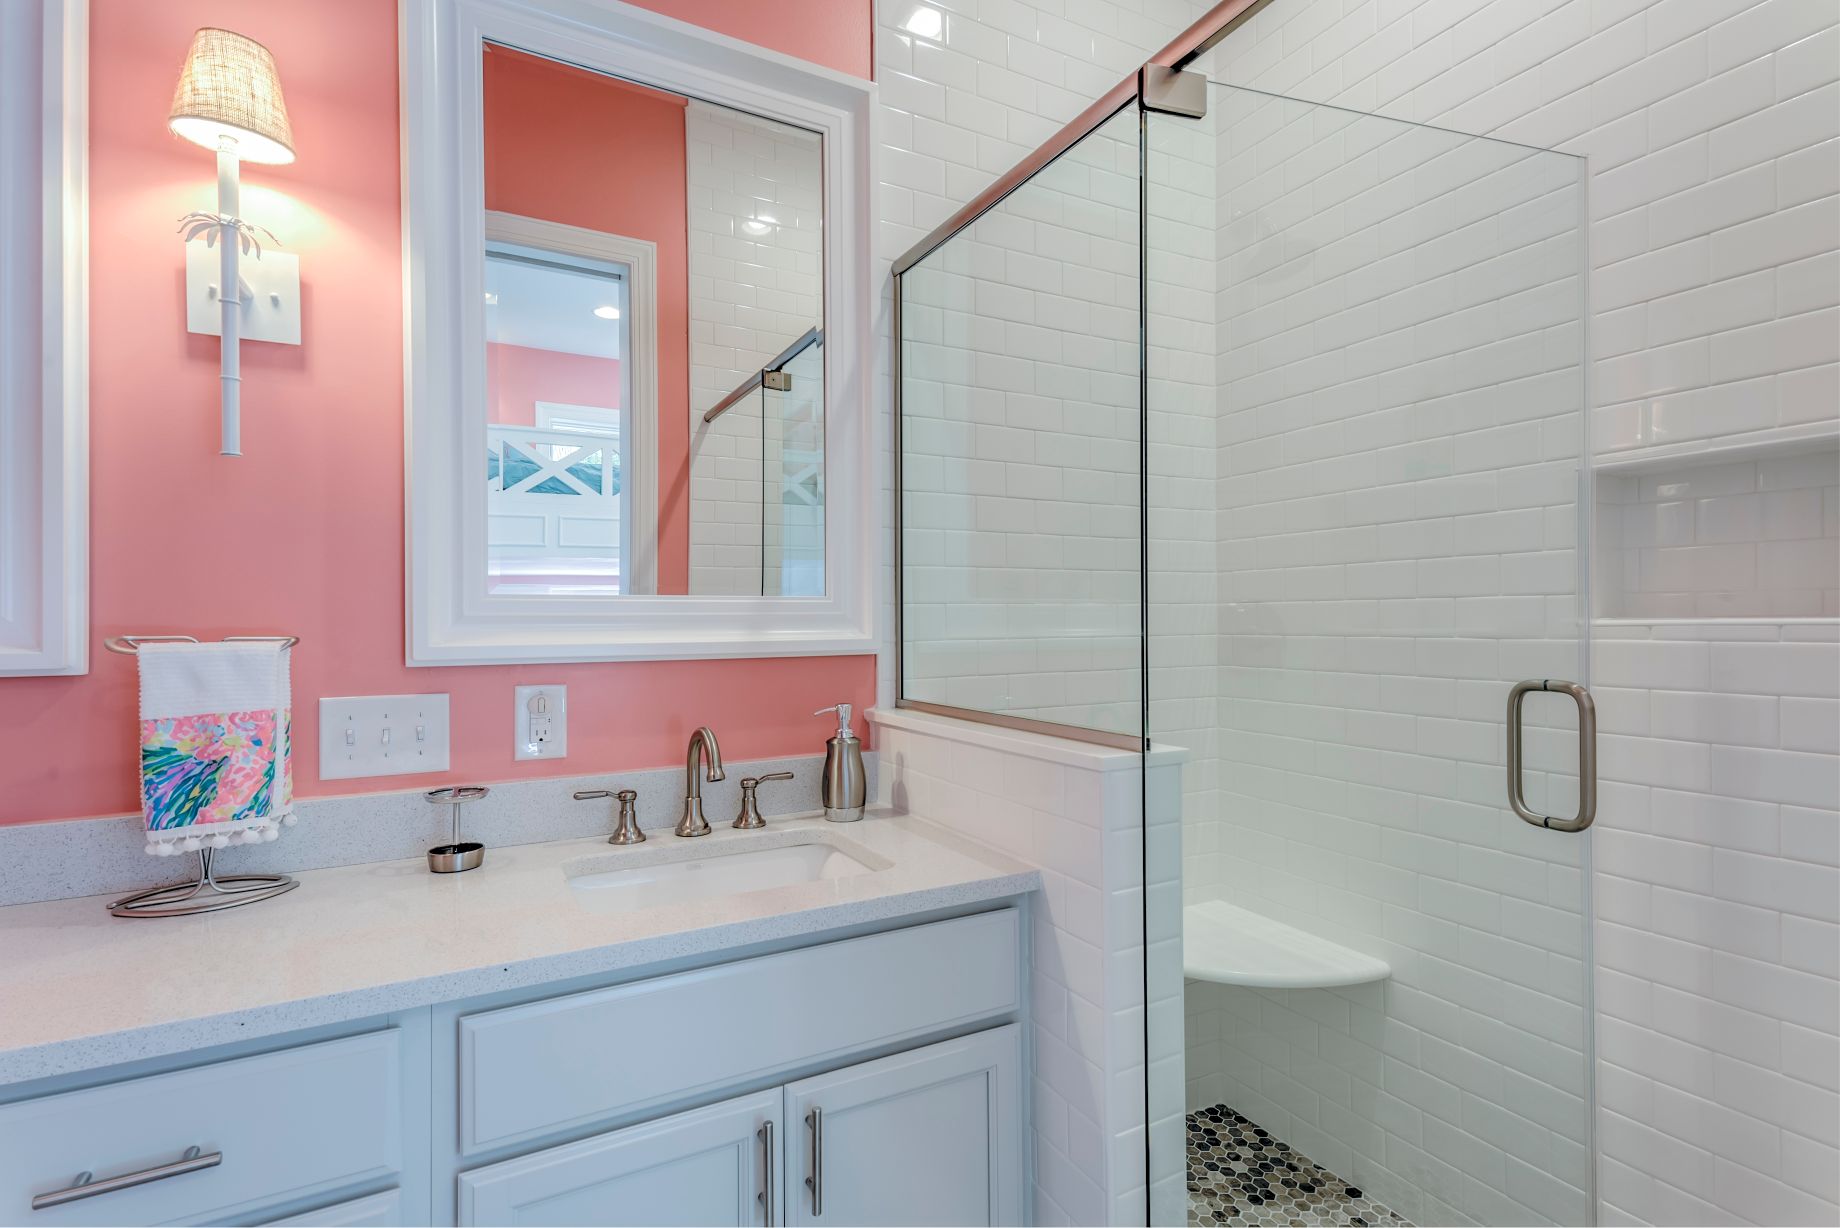 Addition in Juniper Court, Ocean Pines MD - Bathroom with Coral Wall Paint and Square Mirror with White Frame